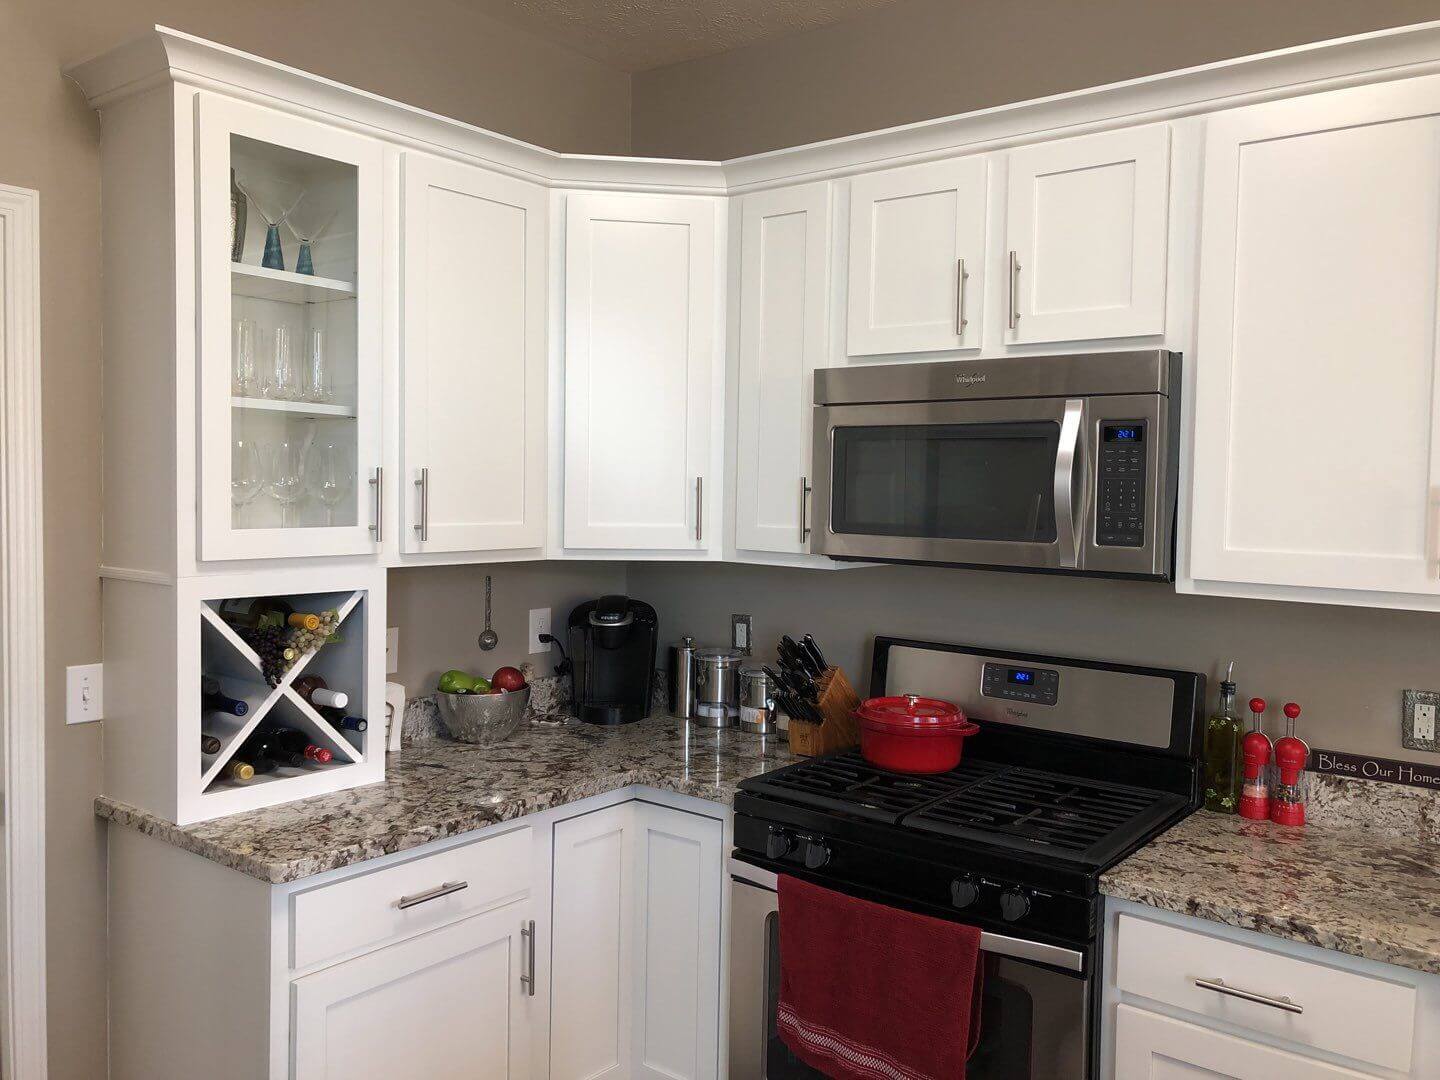 I Paint My Kitchen Cabinets, What Is A Good White To Paint Kitchen Cabinets